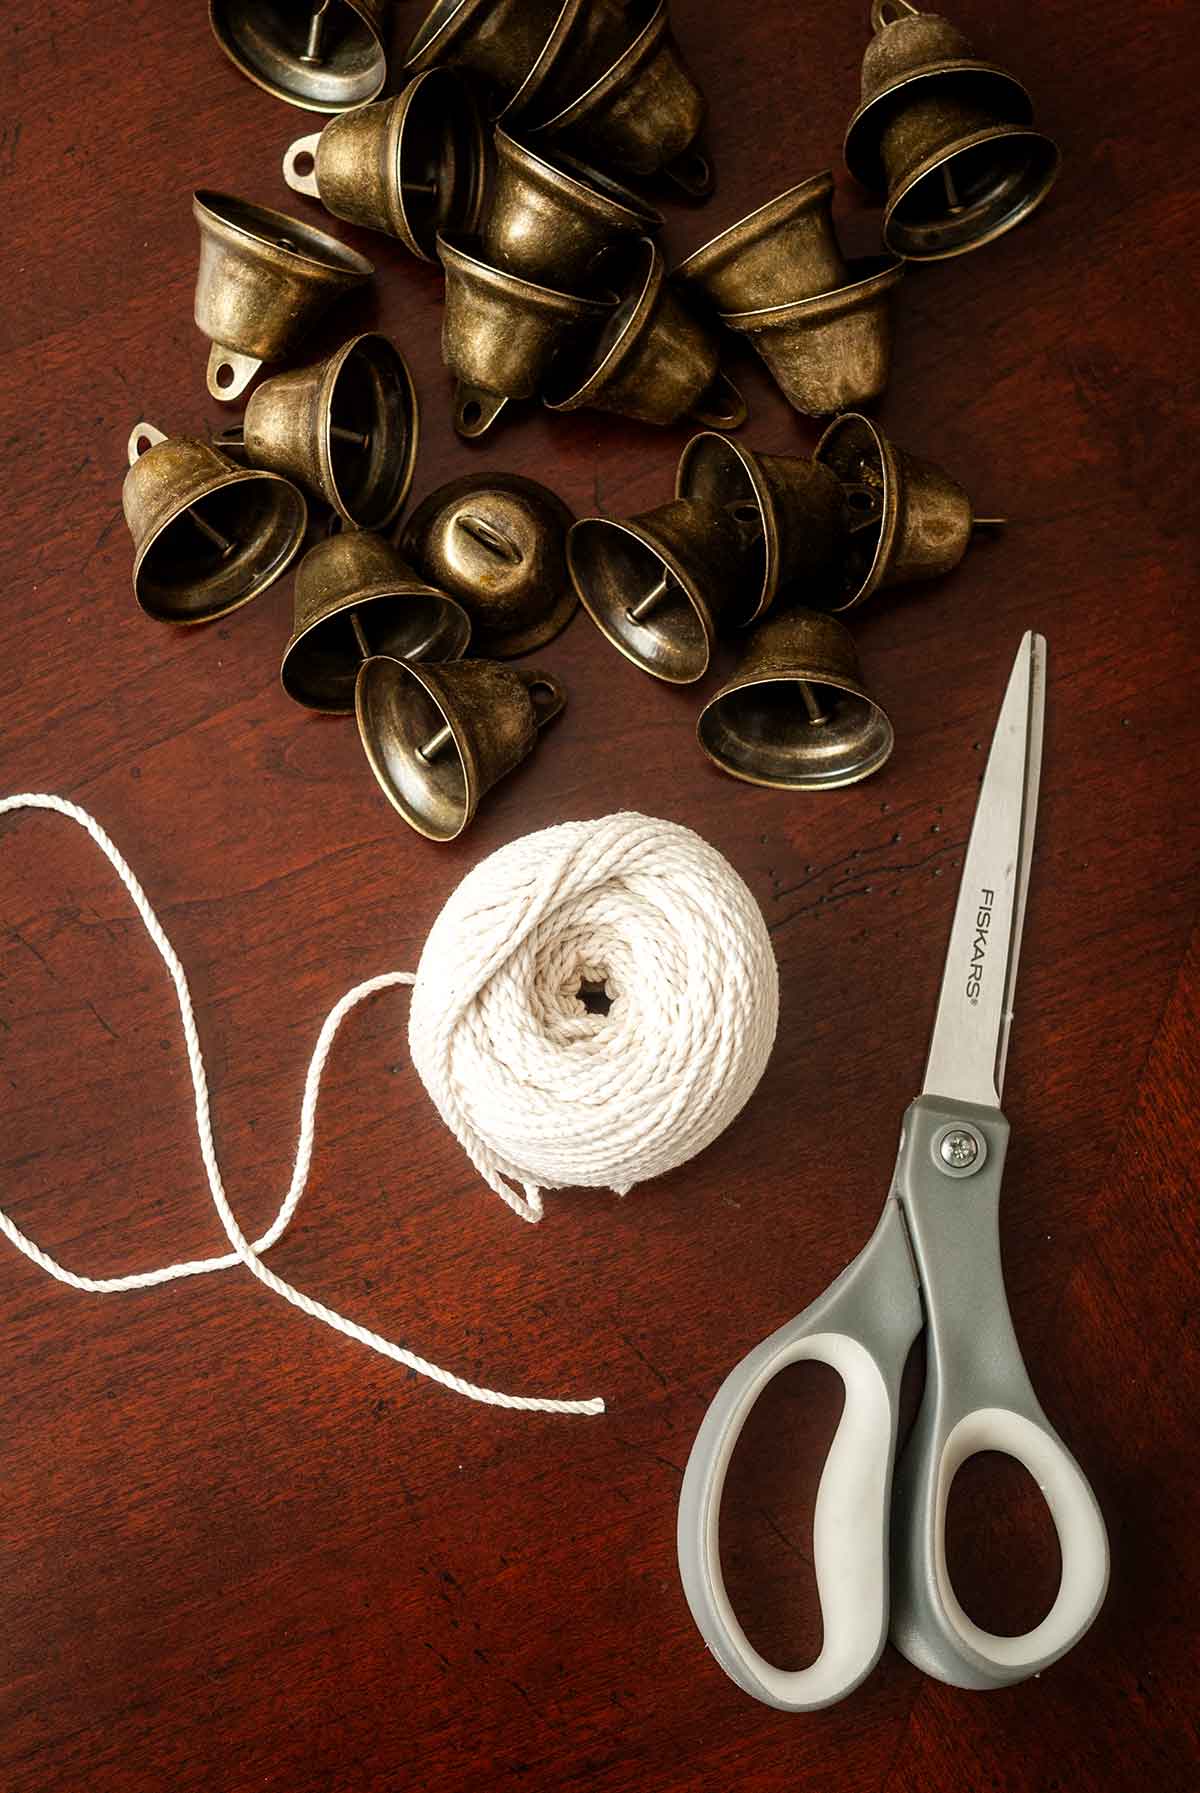 Scissors, a spool of baker's string, and about 20 bells on a table.